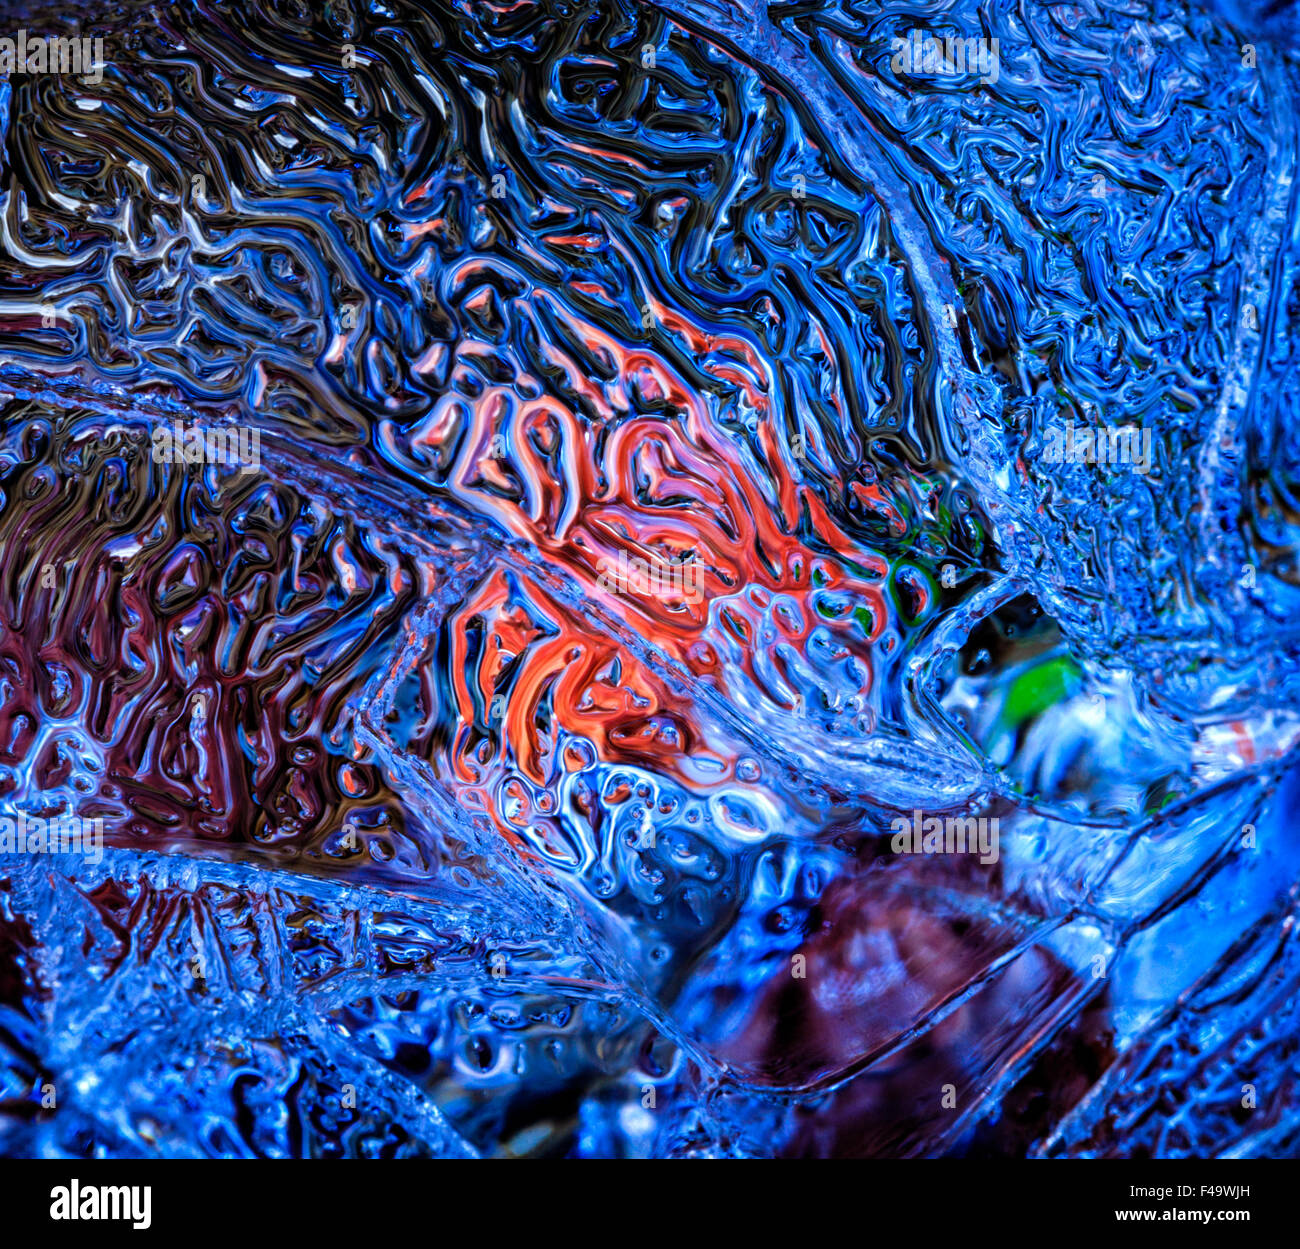 Extreme close-up image of beautiful ice formations in an outdoor water feature Stock Photo